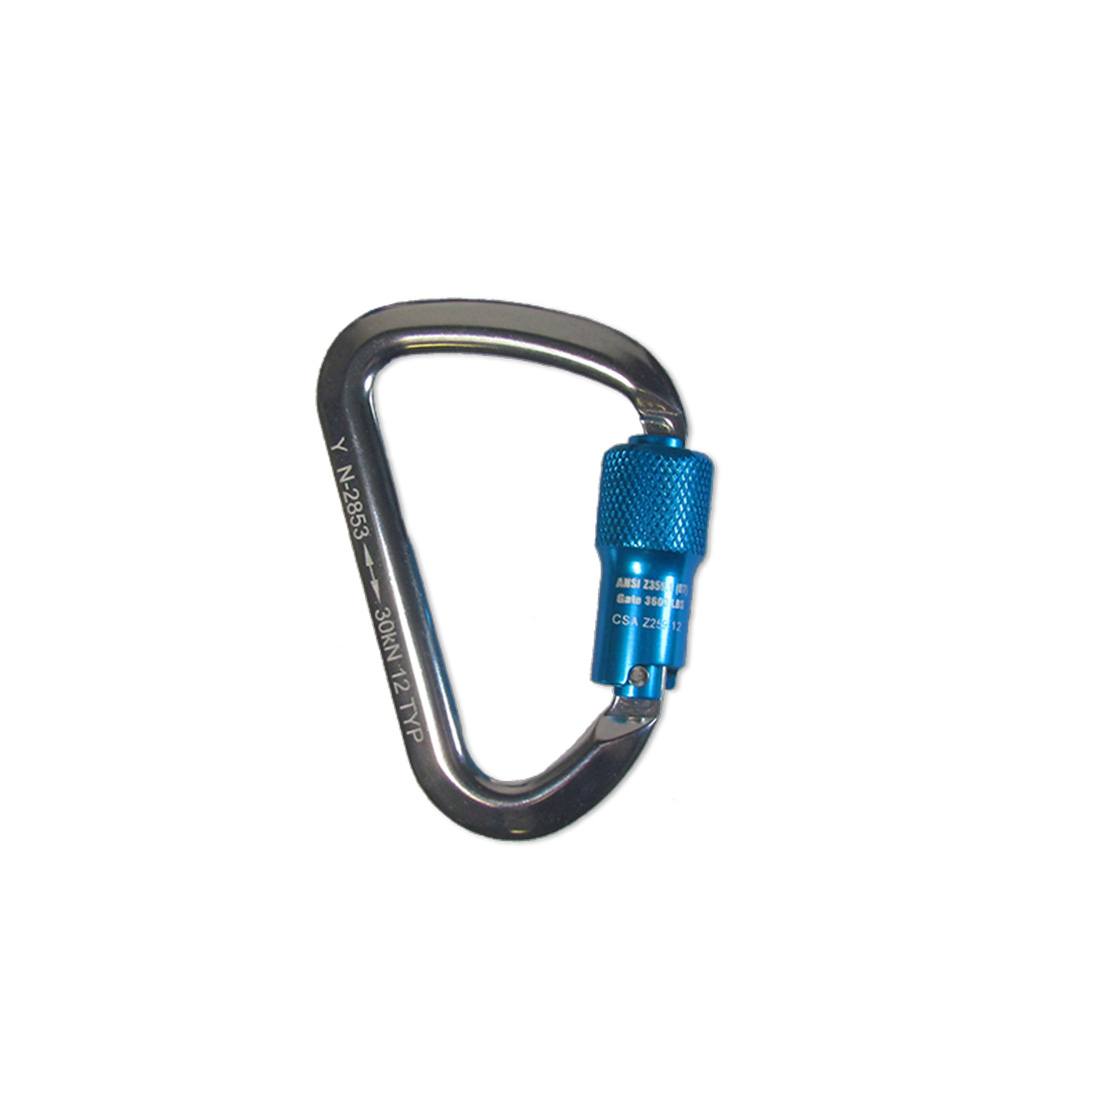 Sky Genie Auto Locking Carabiner - Aluminum - Left Side View Zoomed Out